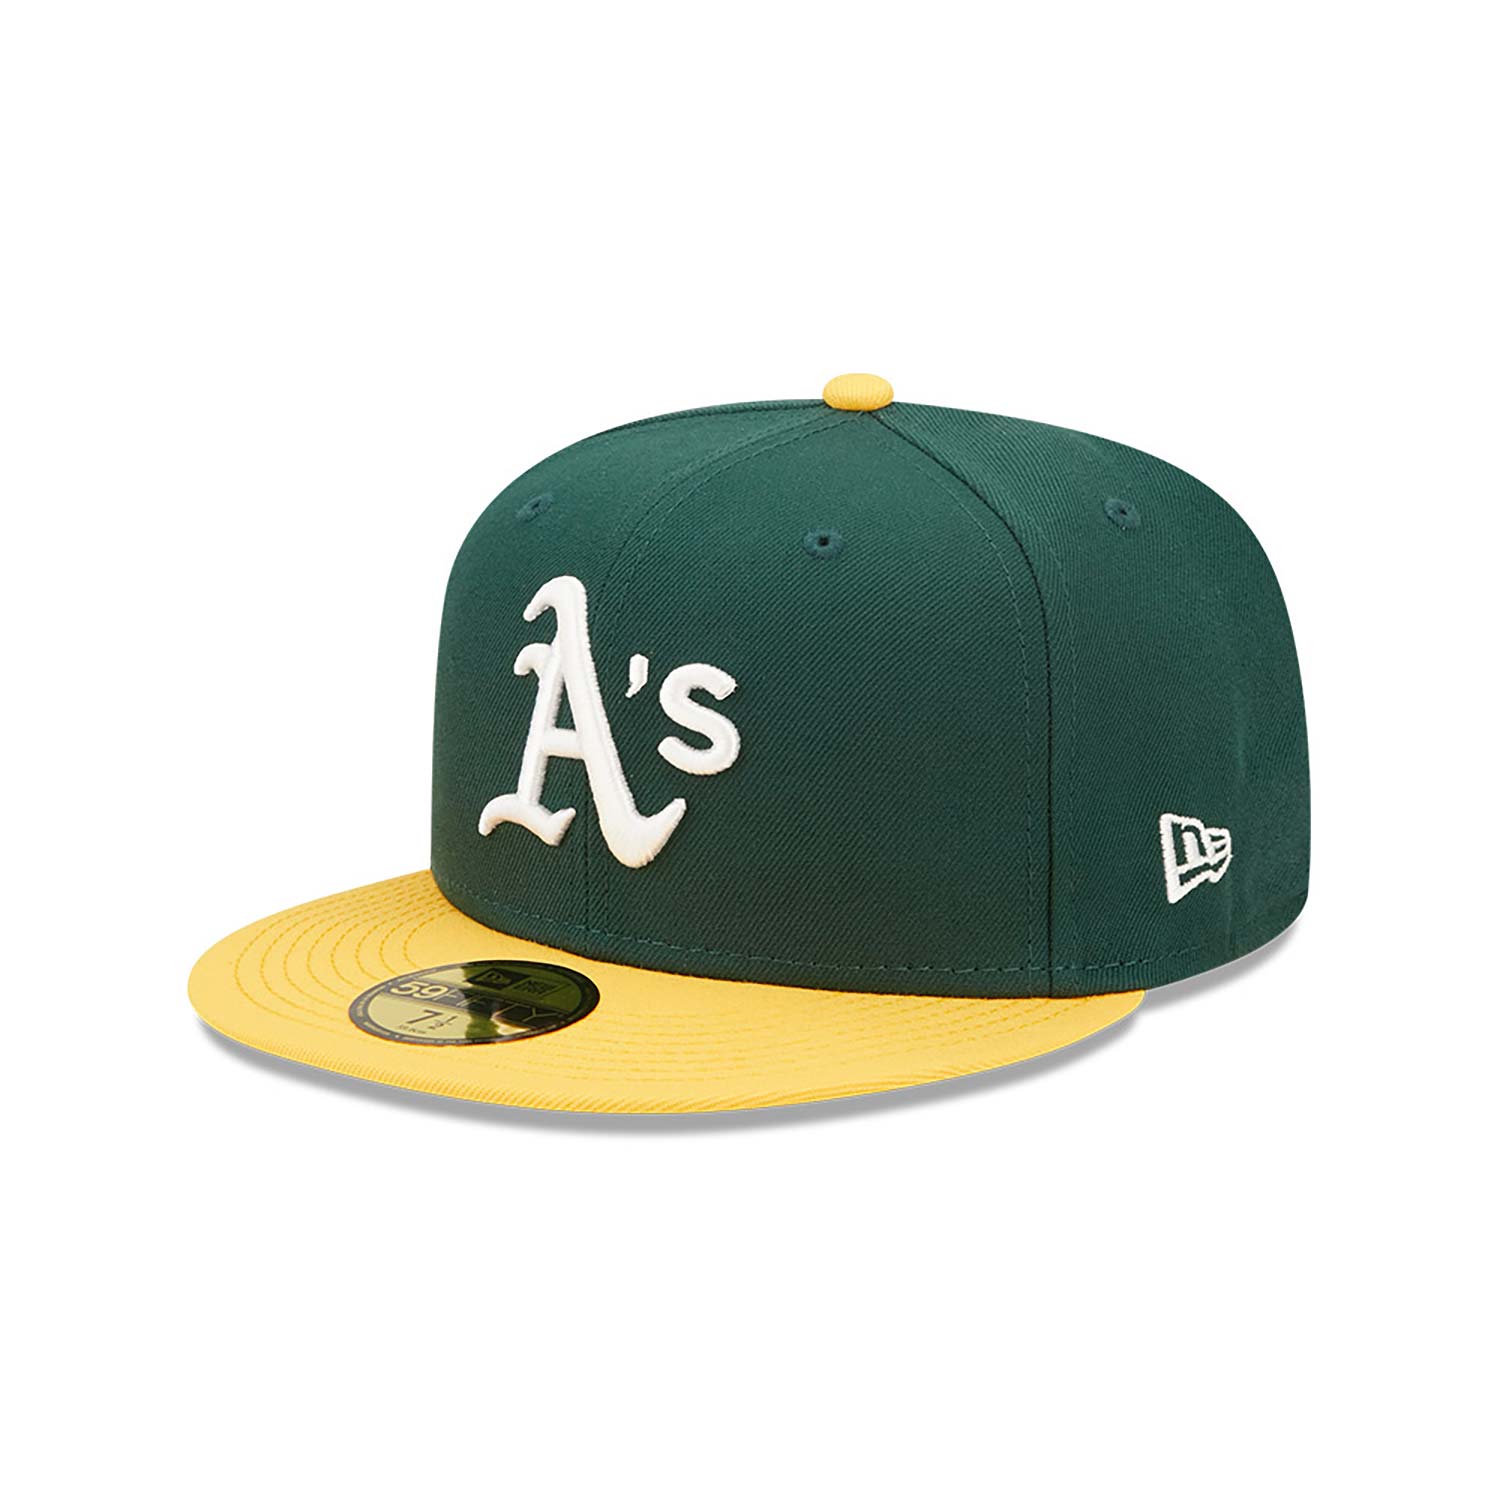 Oakland Athletics Authentic On Field Home Green 59FIFTY Cap